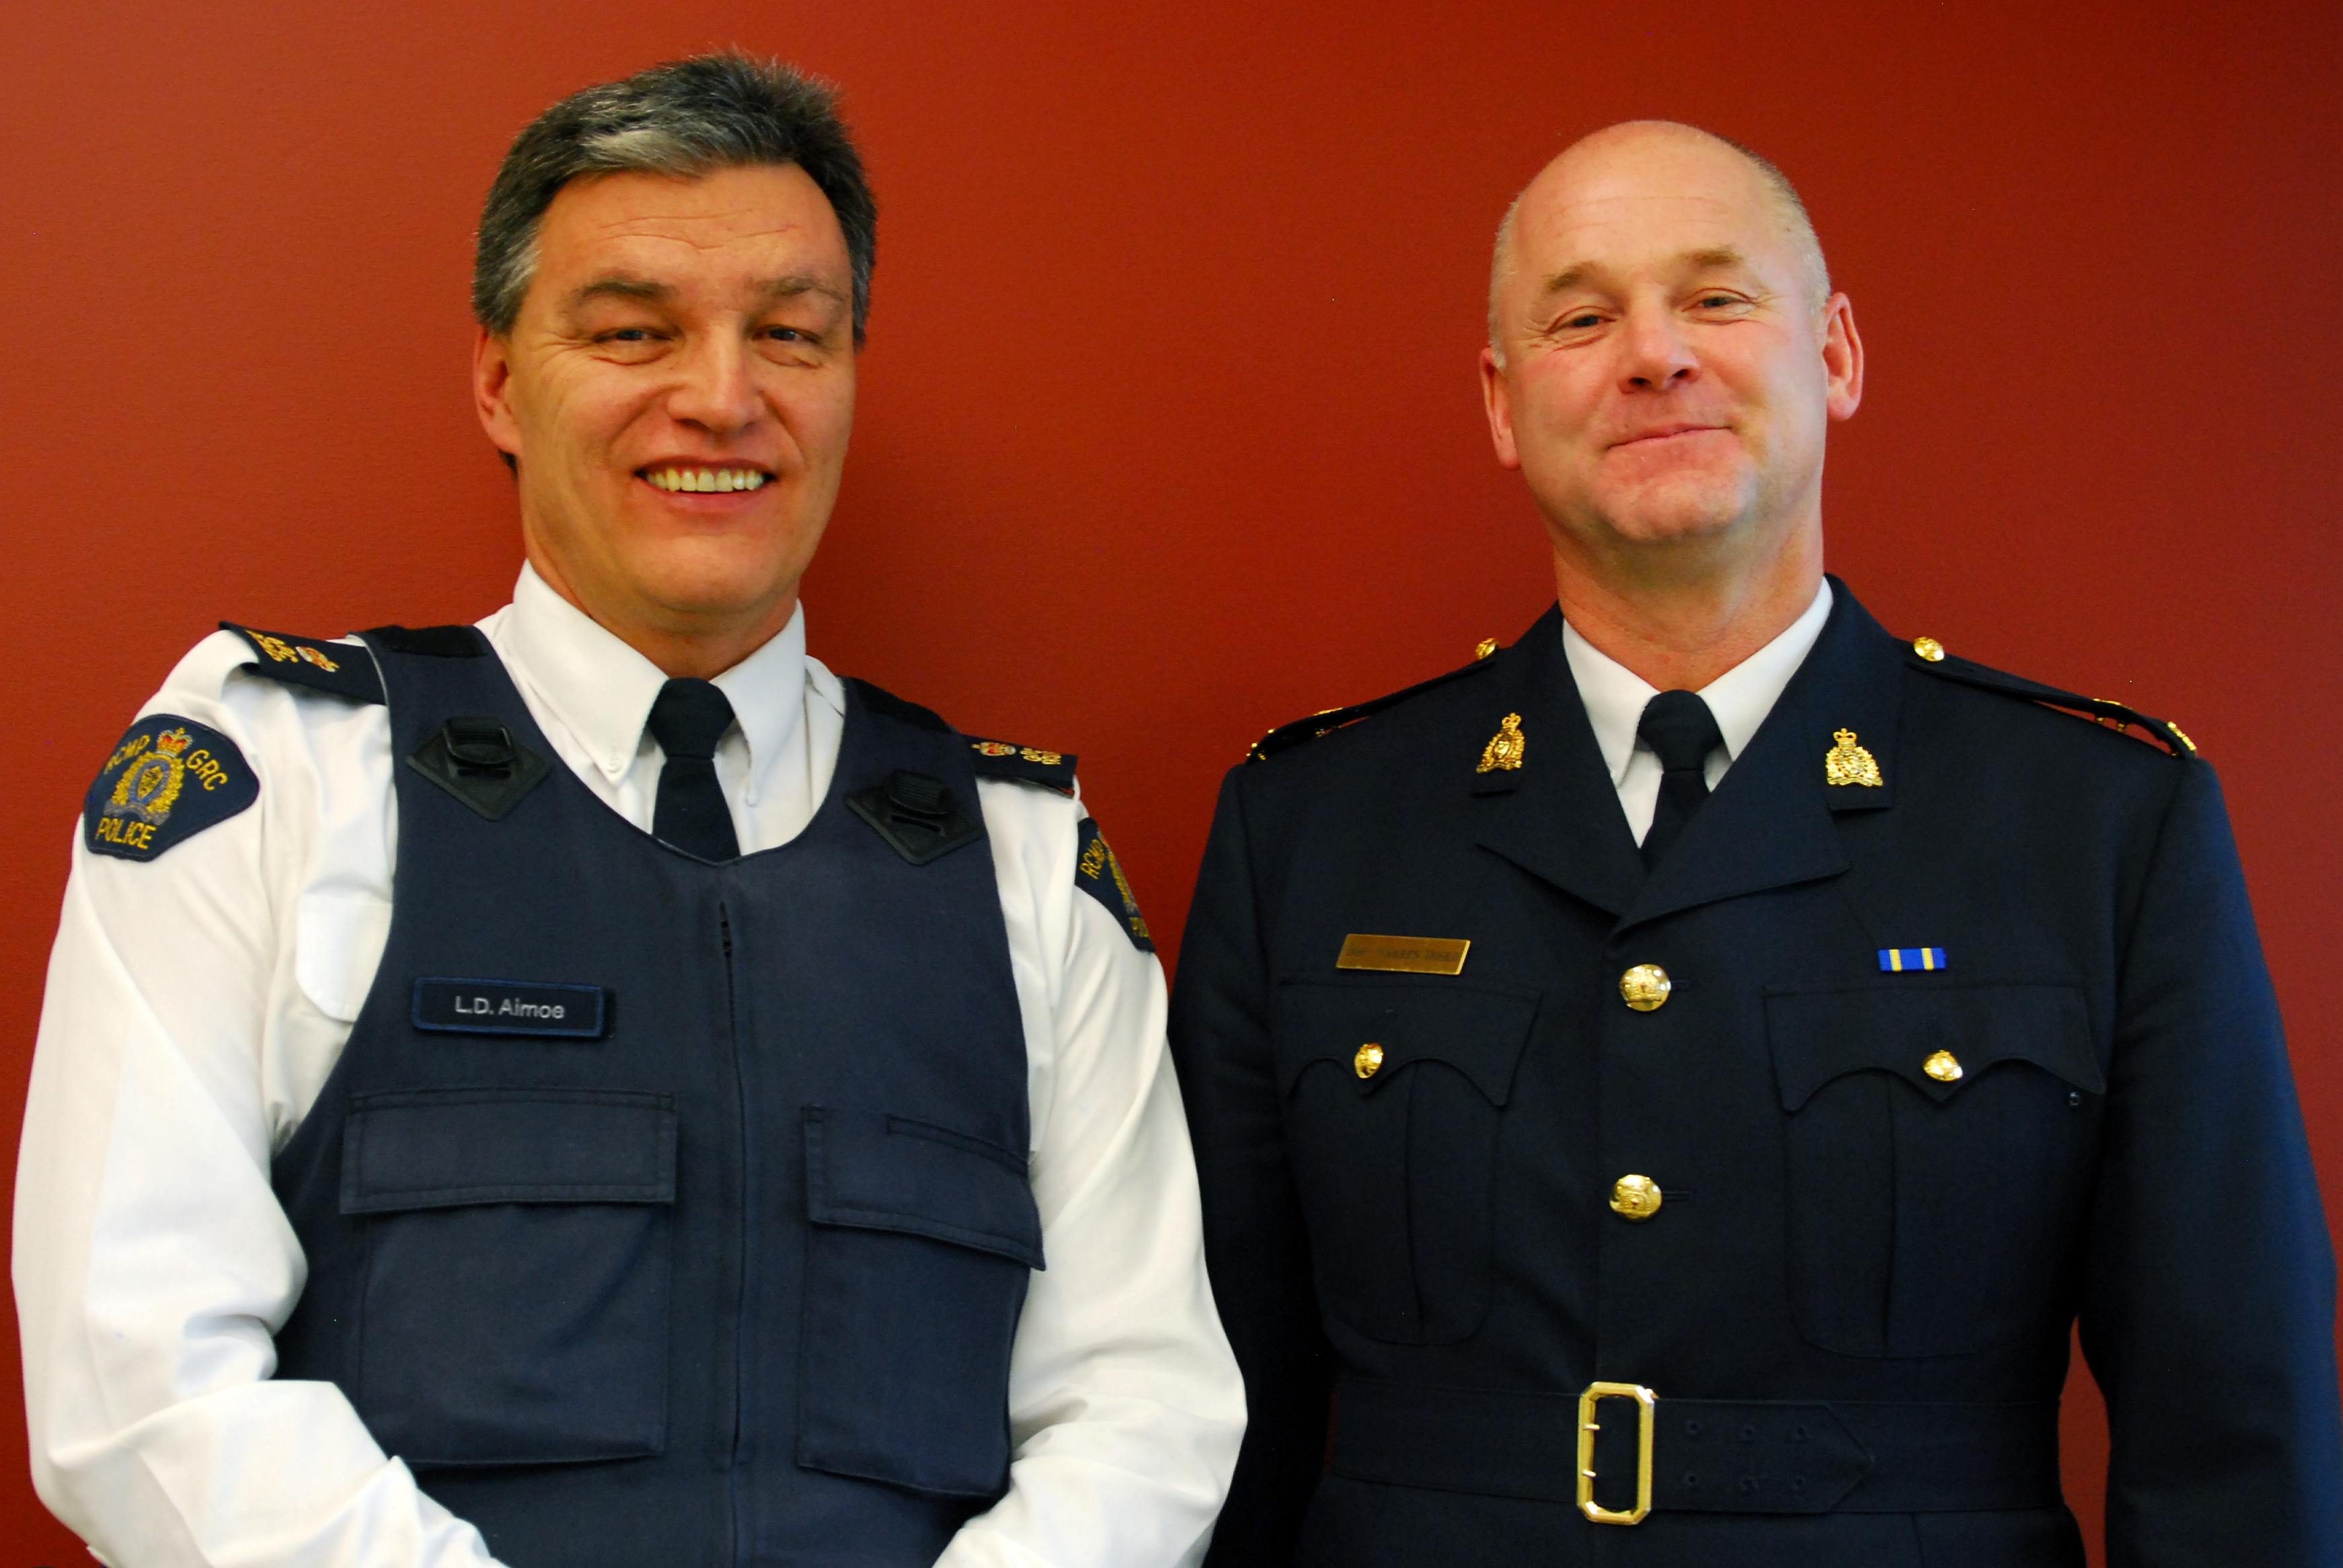 DYNAMIC DUO- RCMP Insp. Lawrence Aimoe and new Superintendant Warren Dosko stand together after discussing their ideas and views on policing in Red Deer.